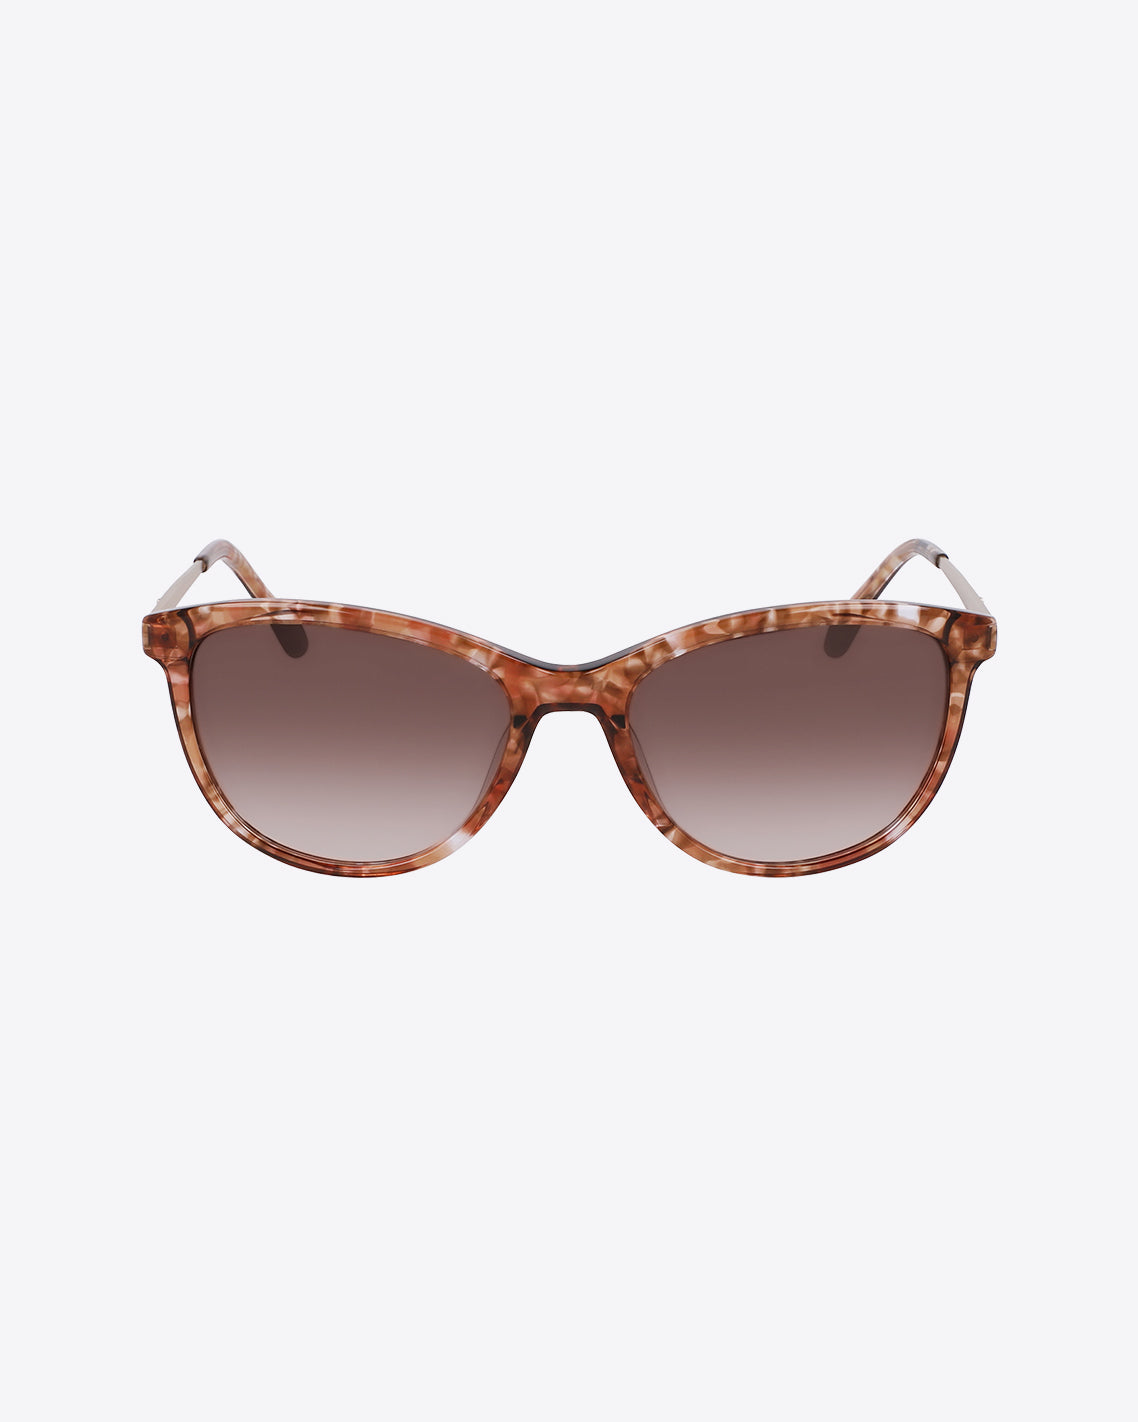 Robin Sunglasses in Taupe Floral